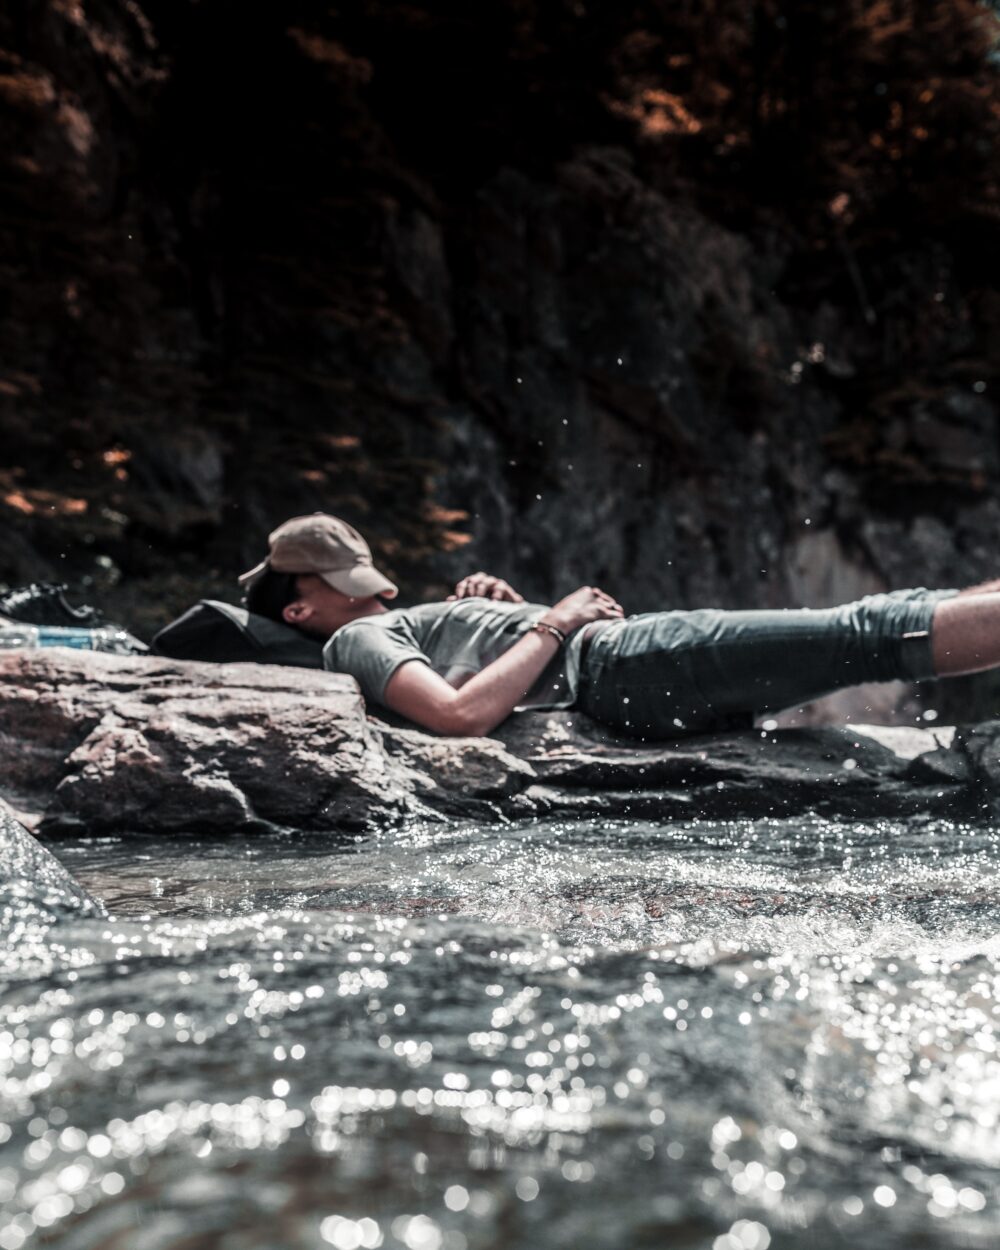 A person sleeping mid-hike with legs elevated, a cap over their face, and water running nearby from a river.